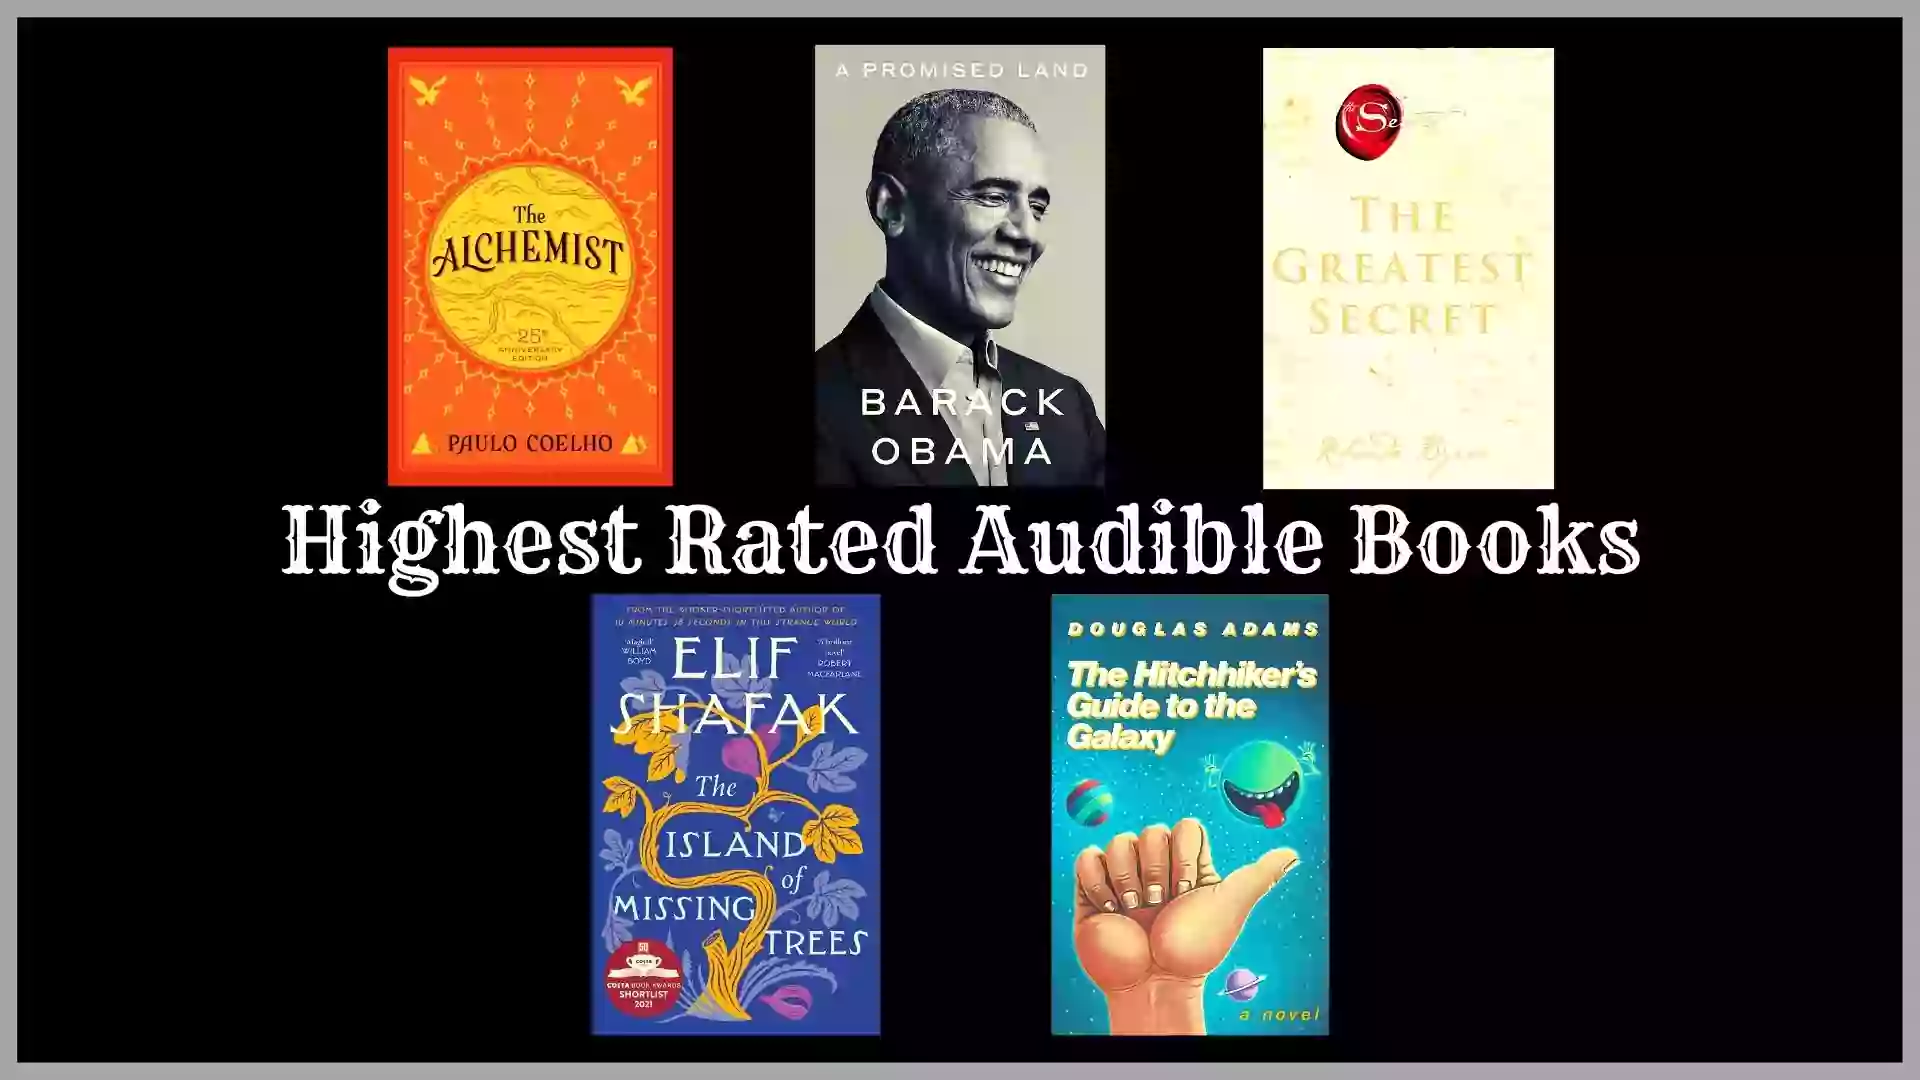 Highest Rated Audible Books